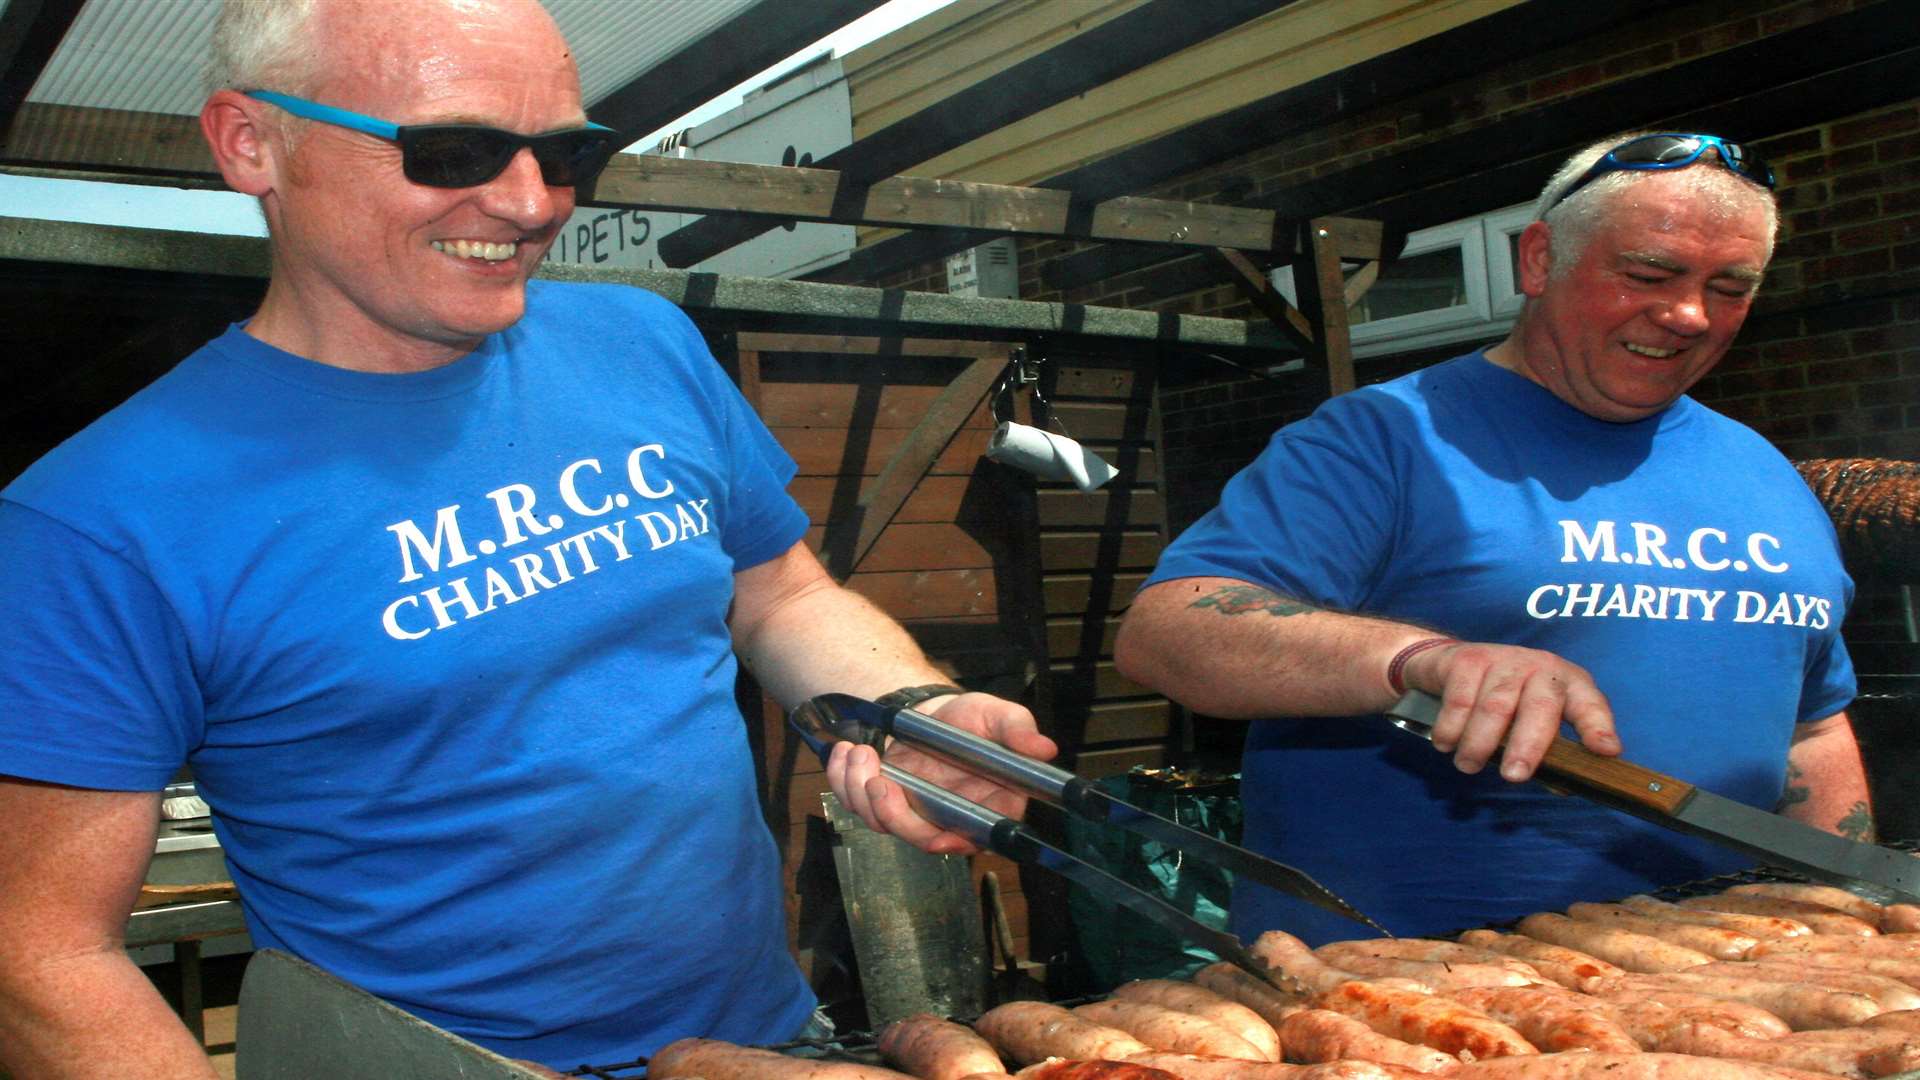 Mike Knowles (left) and Doug Cowie (right) had the hot job of cooking the food at the funday